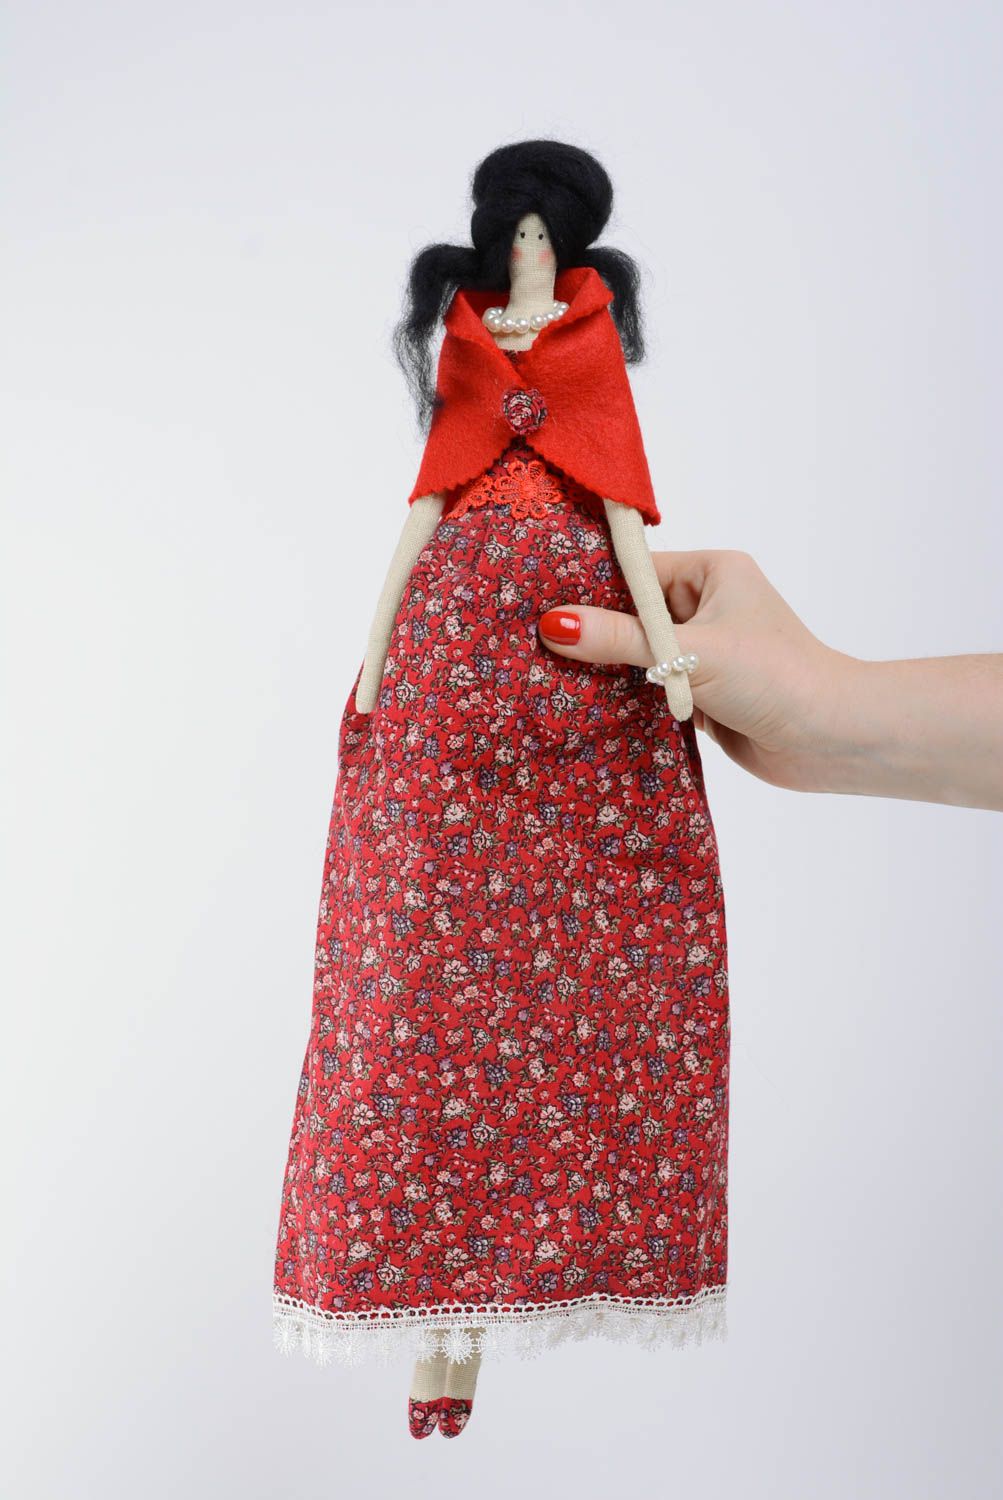 Fabric doll brunette in dress made of cotton handmade interior toy for children photo 3